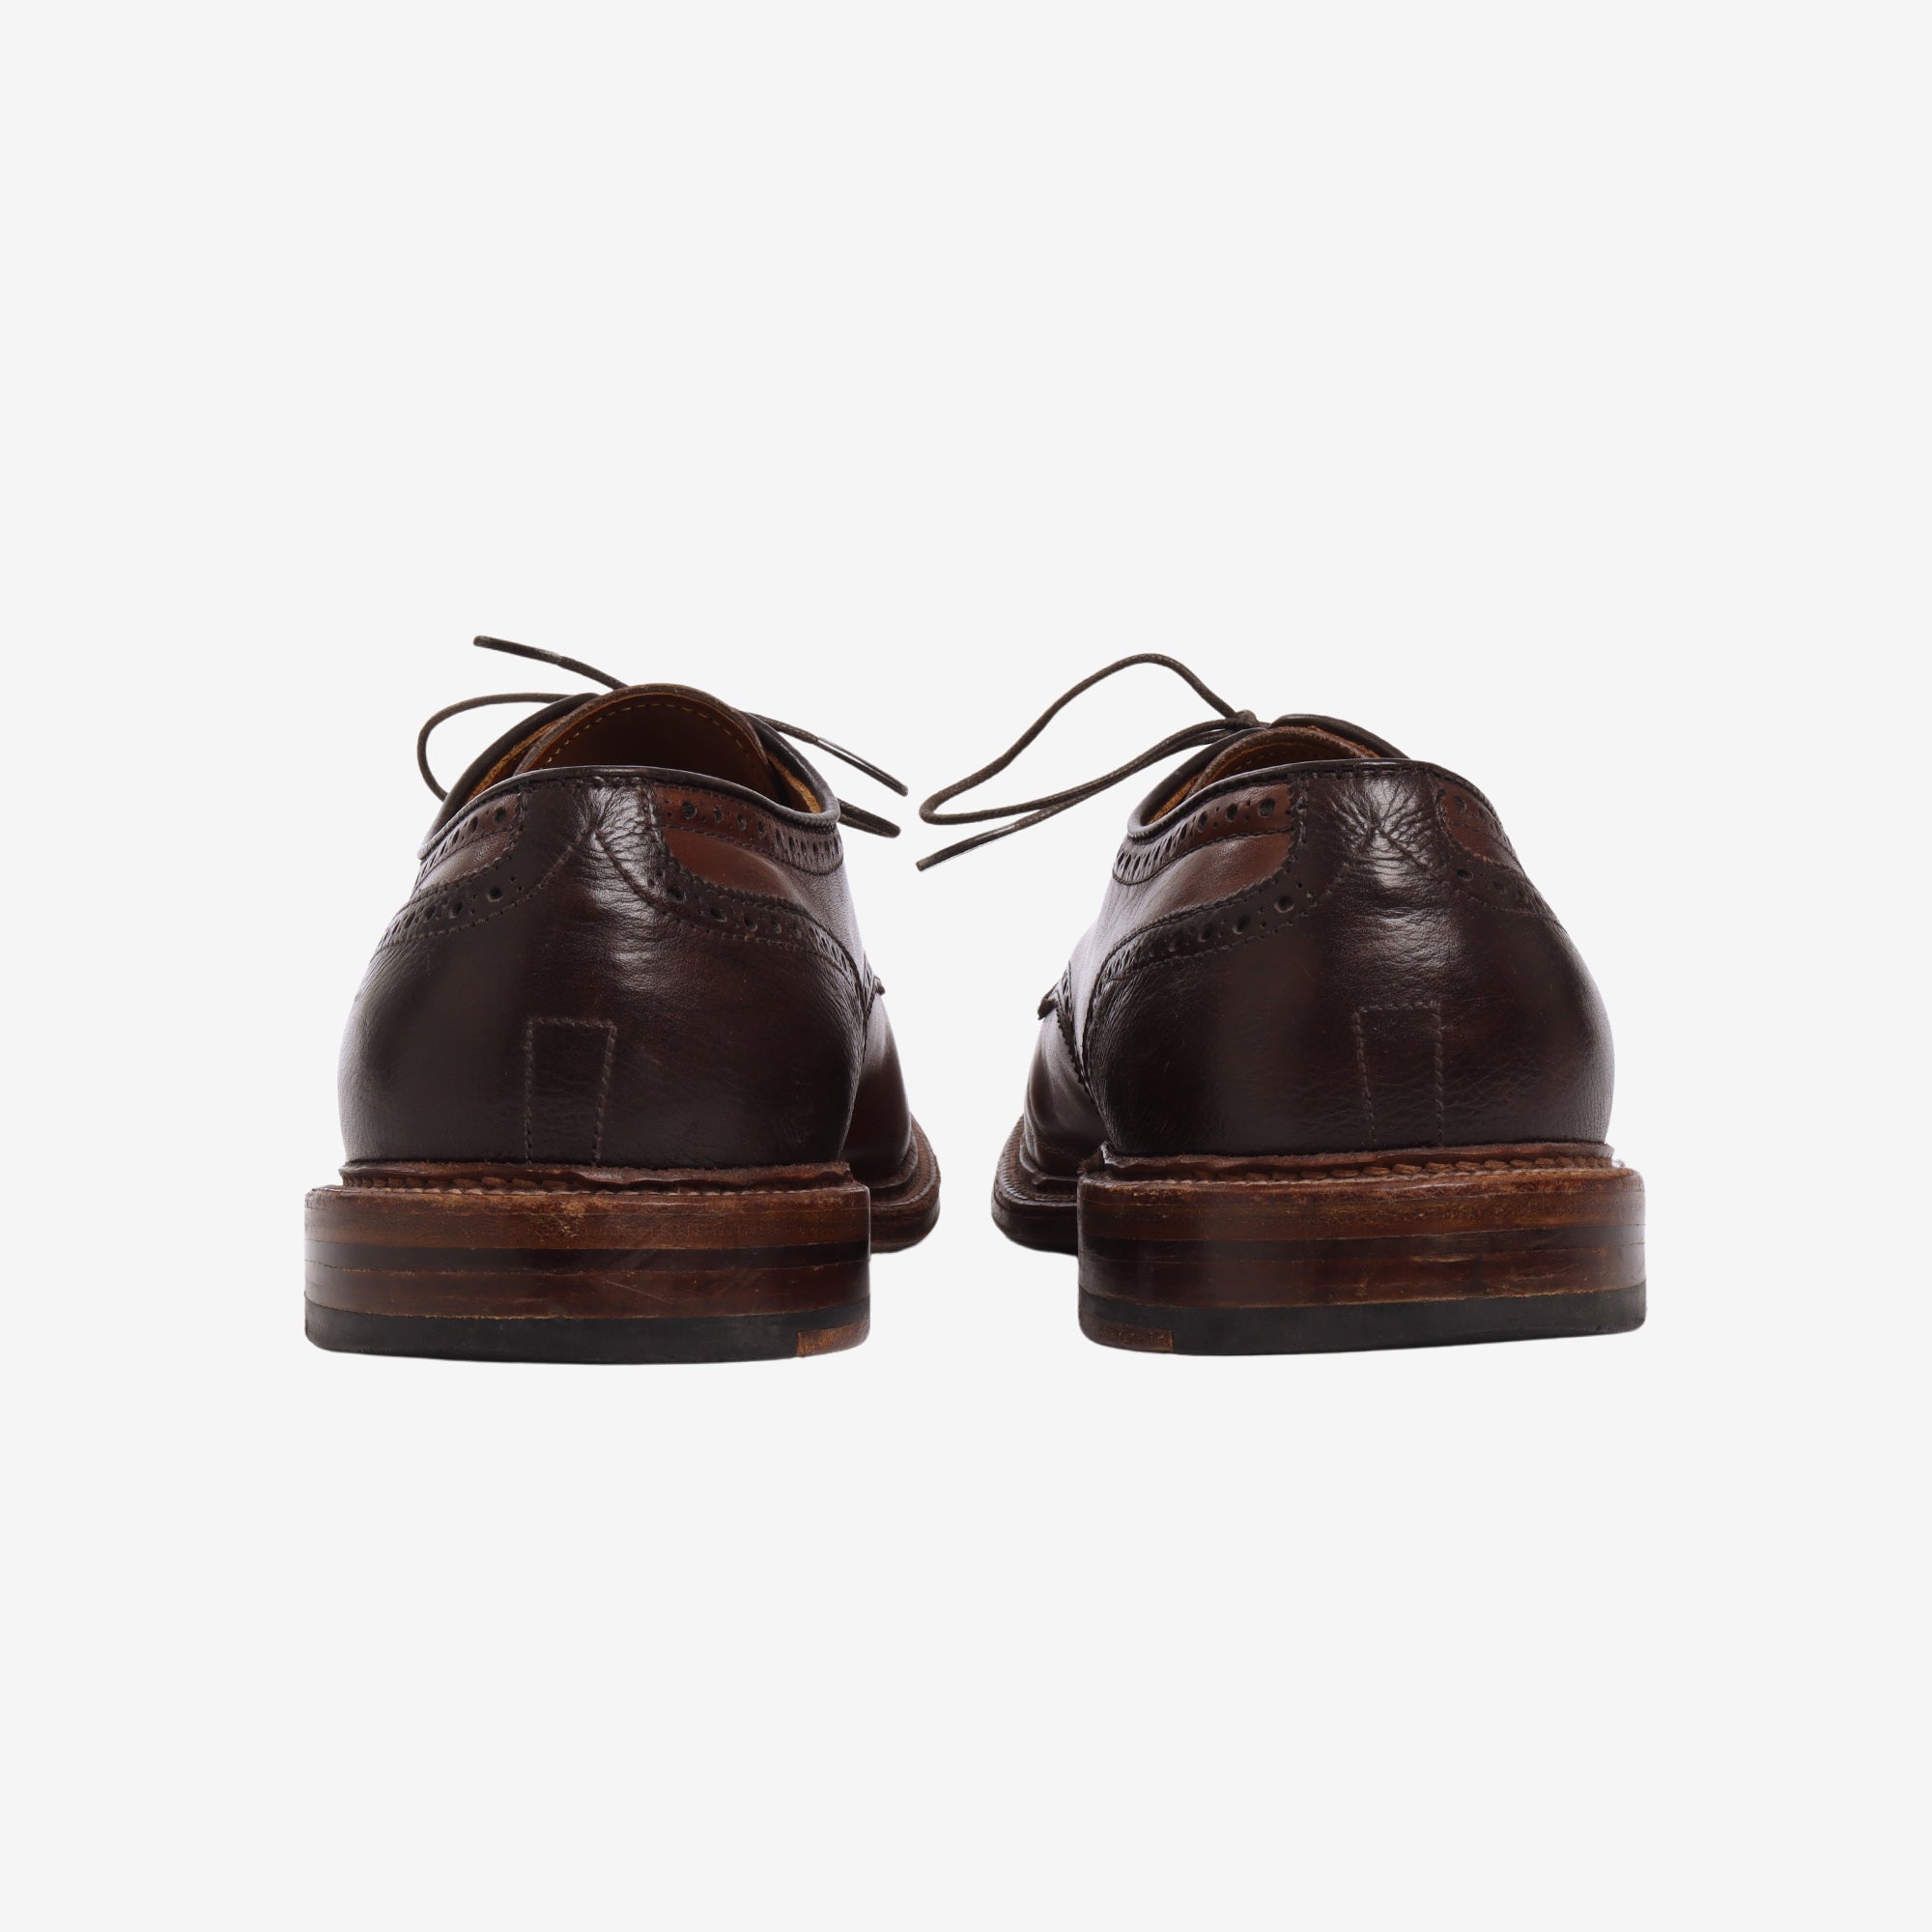 Unionmade Two-Tone Cap Toe Shoes